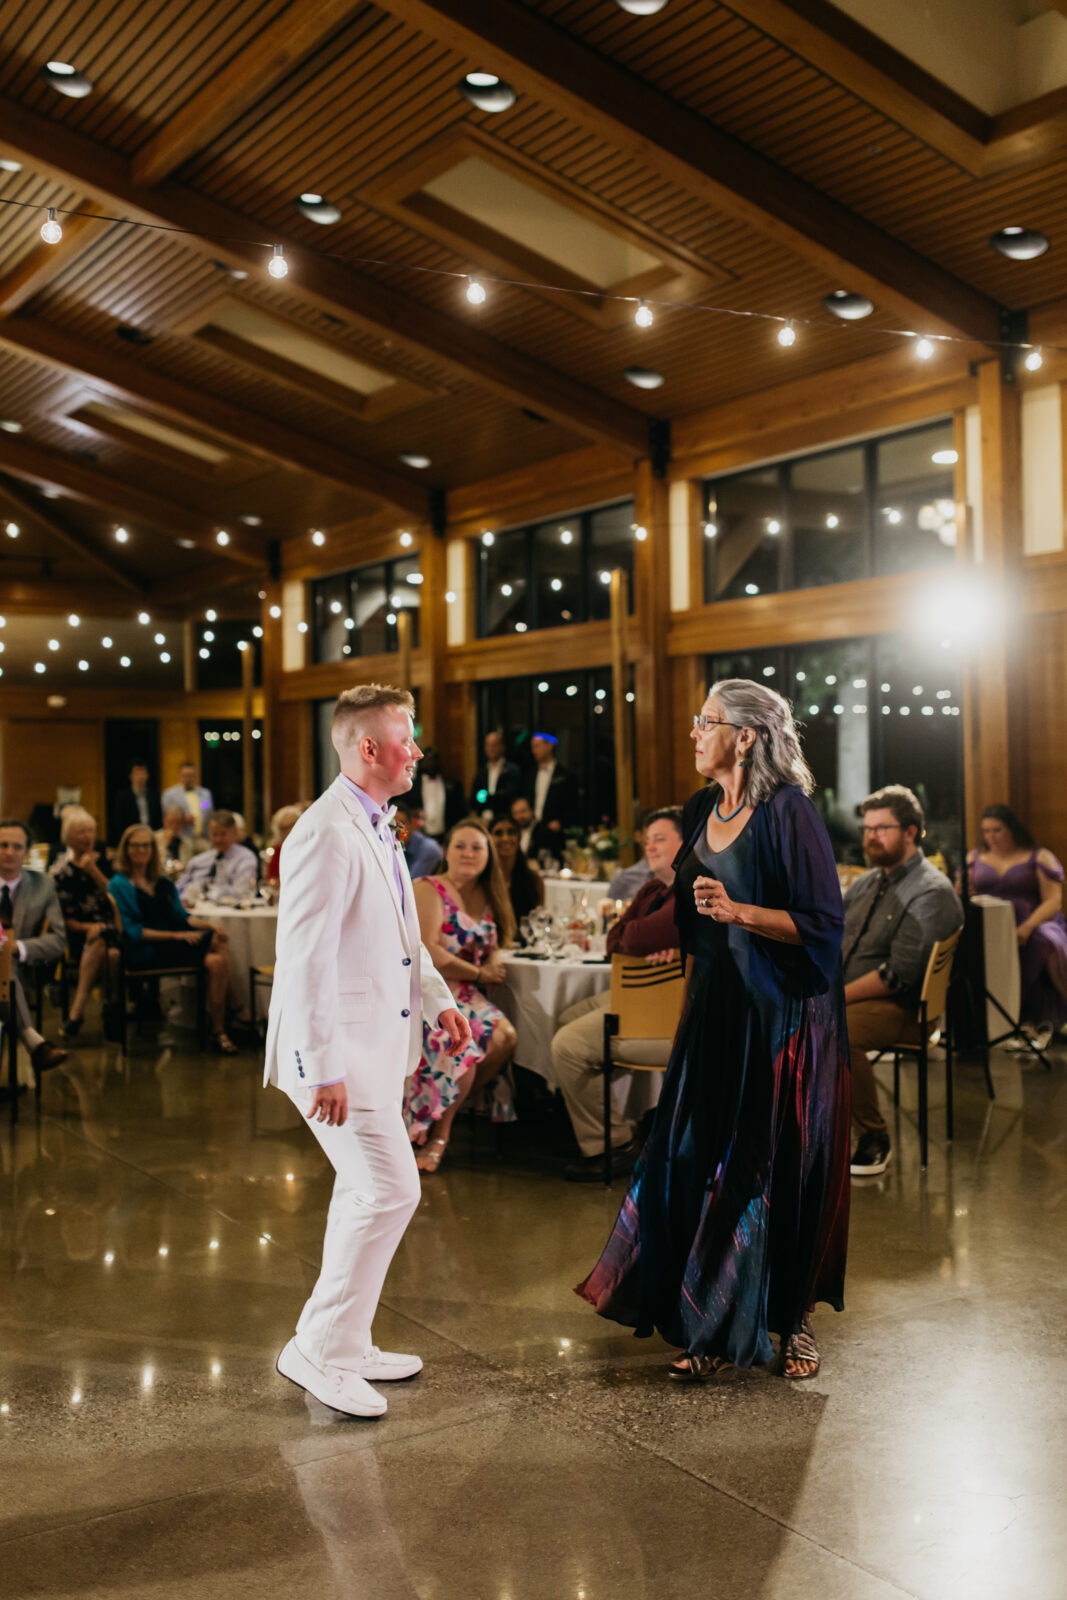 A photo of the groom dancing at the reception